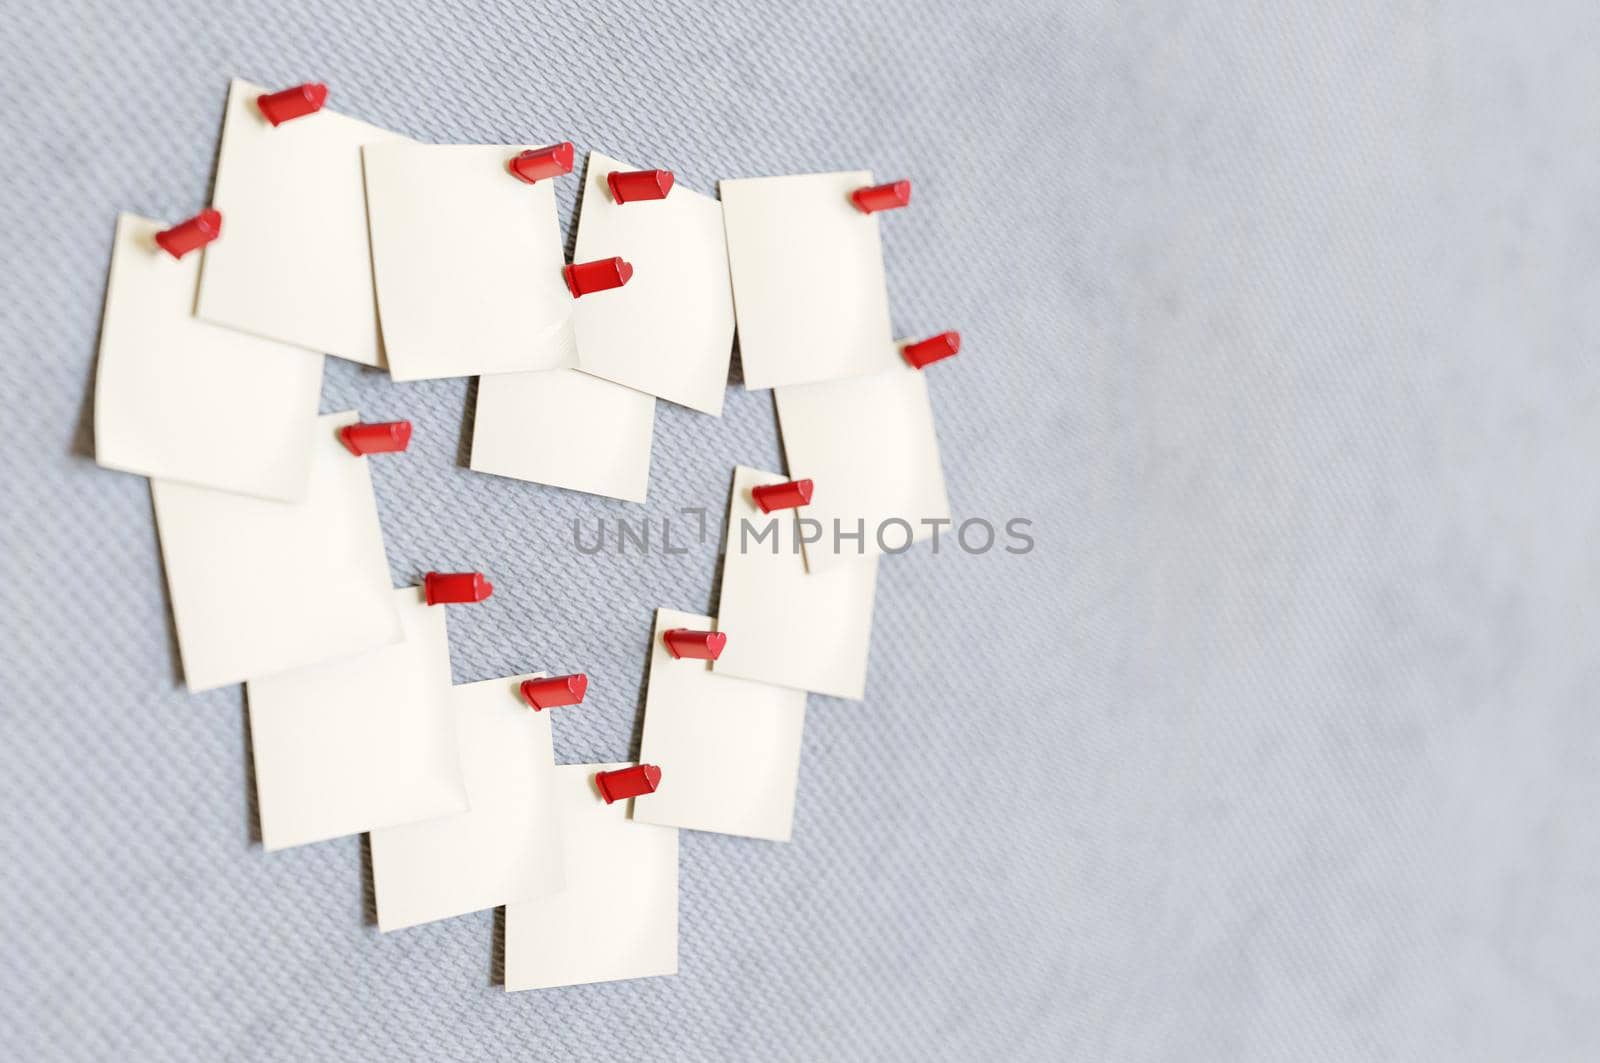 3d illustration. Blank note paper making shape of heart  pinned cork board. space for text